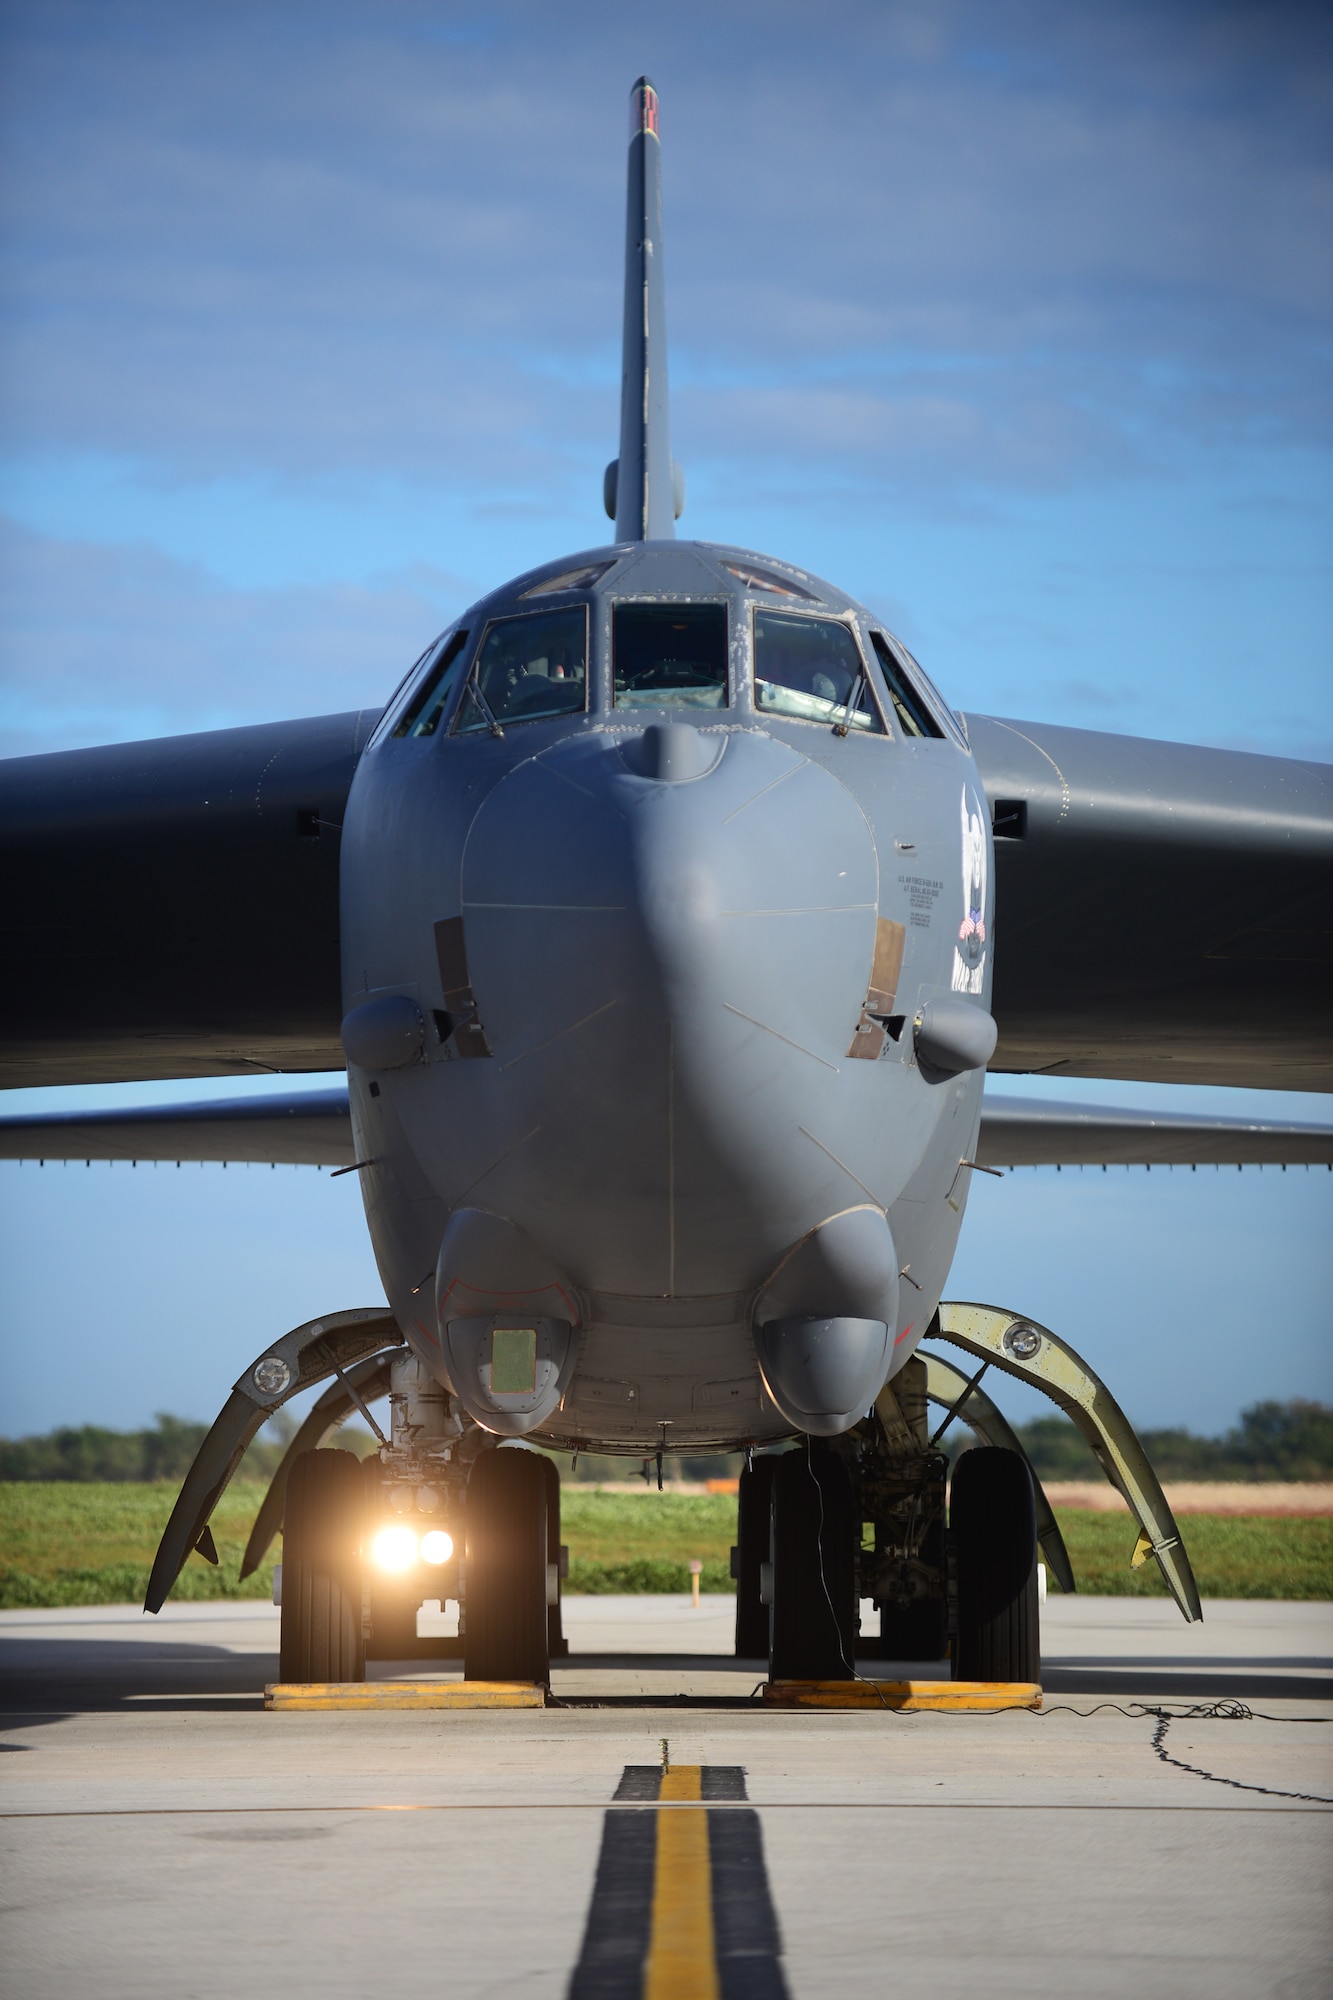 A B-52 Stratofortress sits on the flightline March 21, 2016, at Andersen Air Force Base, Guam. The B-52 is a long-range, heavy bomber that can fly up to 50,000 feet and has the capability to carry 70,000 pounds of nuclear or precision guided conventional ordnance with worldwide precision navigation capability. (U.S. Air Force photo by Senior Airman Joshua Smoot/Released)